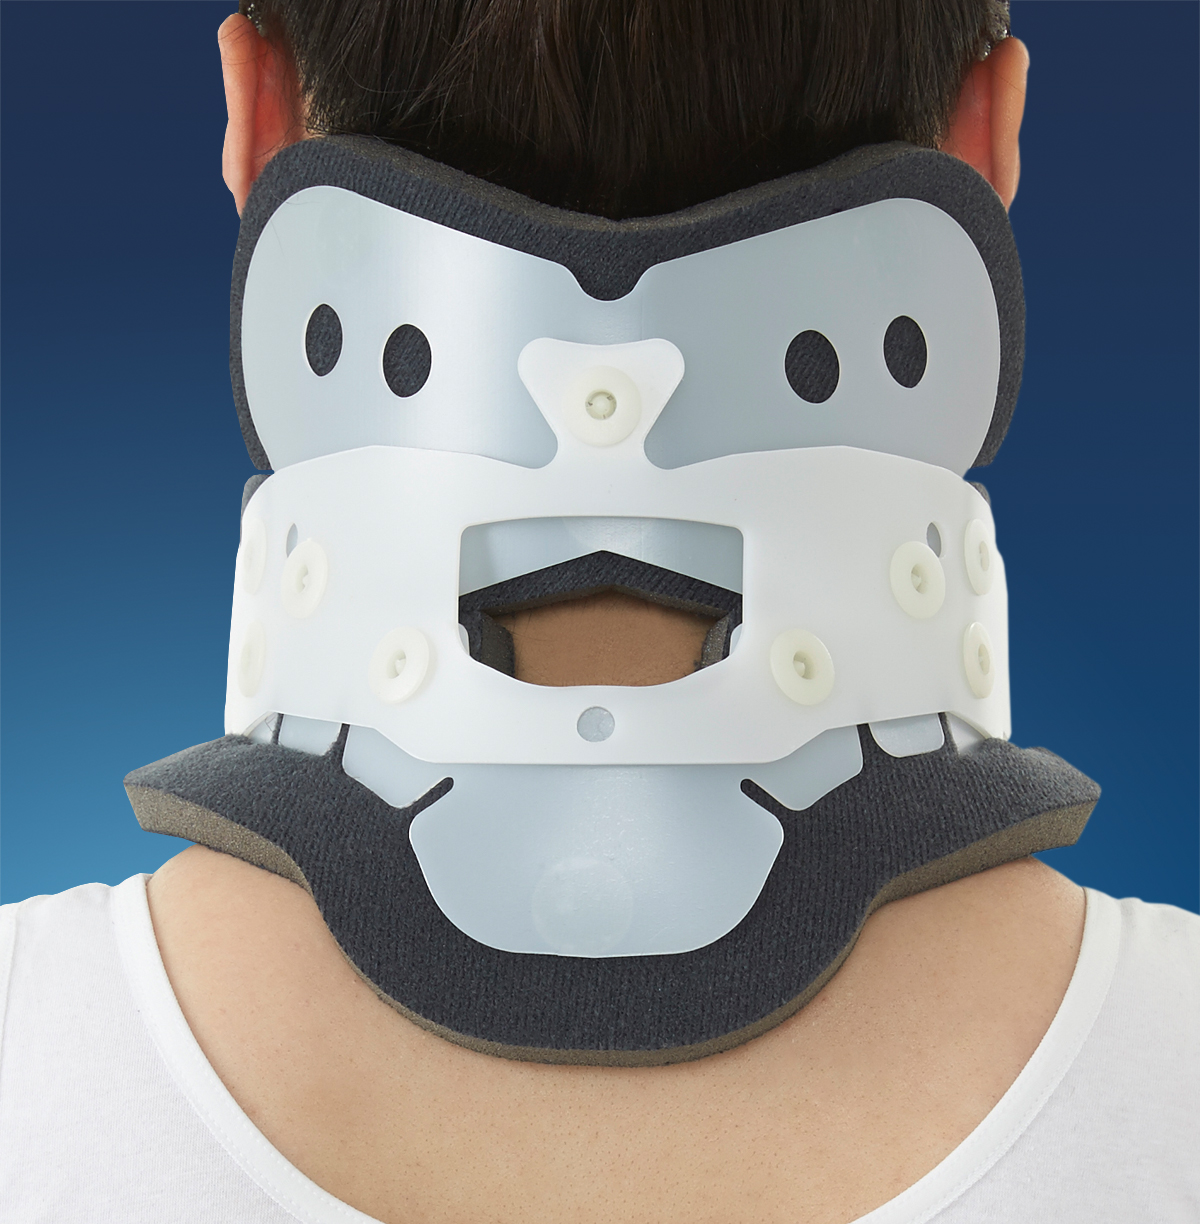 Stable cervical collar